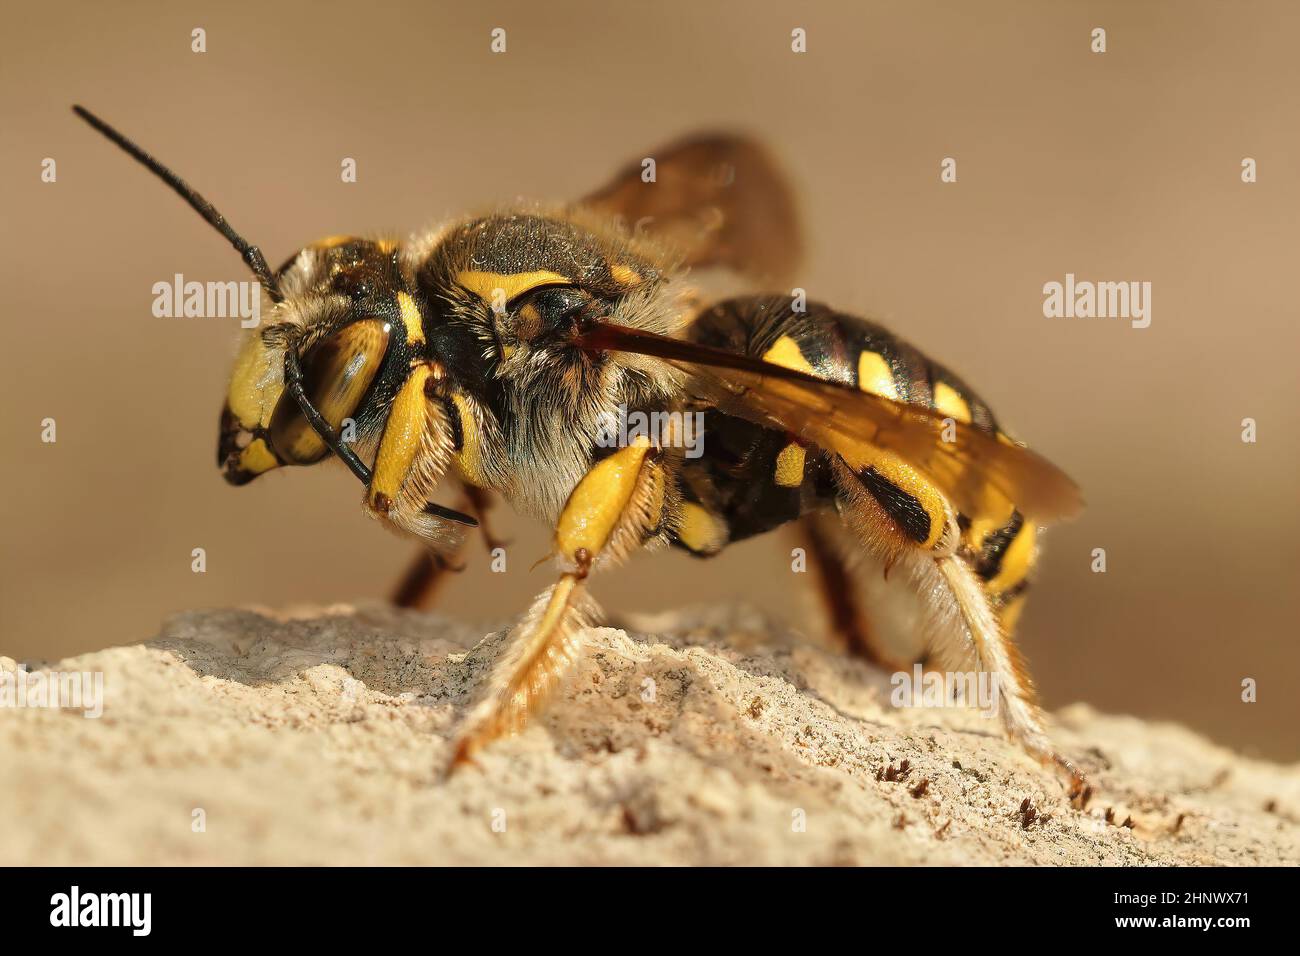 Closeup on a Florentine Woolcarderbee, Anthidium florentinum sitting on a wall in Gard, France with open wings Stock Photo